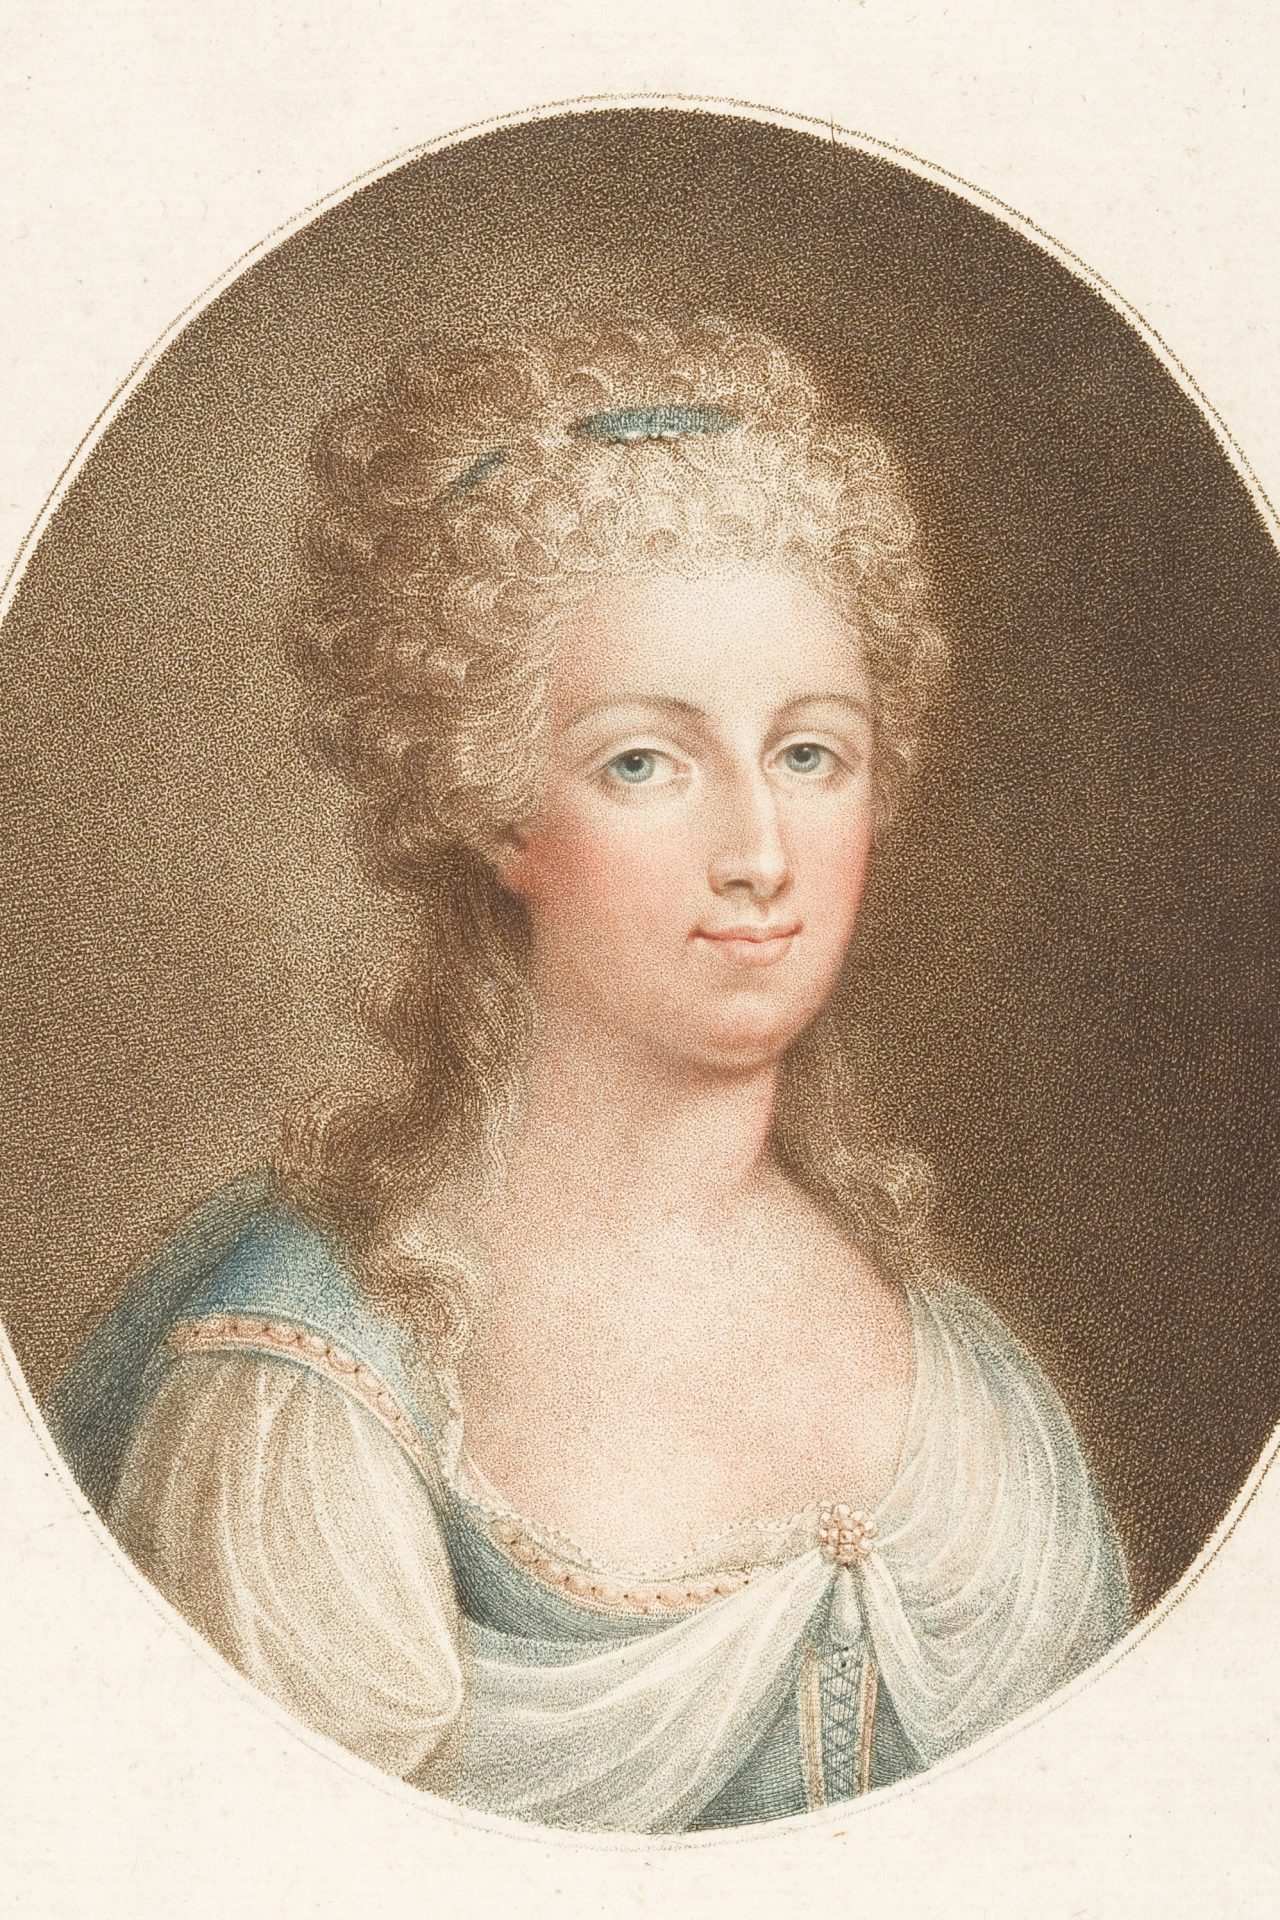 <p>Marie Antoinette was guillotined on October 16, 1793, nine months after her husband King Louis XVI, when she was only 38 years old. On that day, legend has it that the Austrian woman stepped on the foot of her executioner, Sanson the Great, while climbing onto his scaffold. She would then have apologized by uttering these very last words: "Pardon me, sir, I did not do it on purpose."</p>